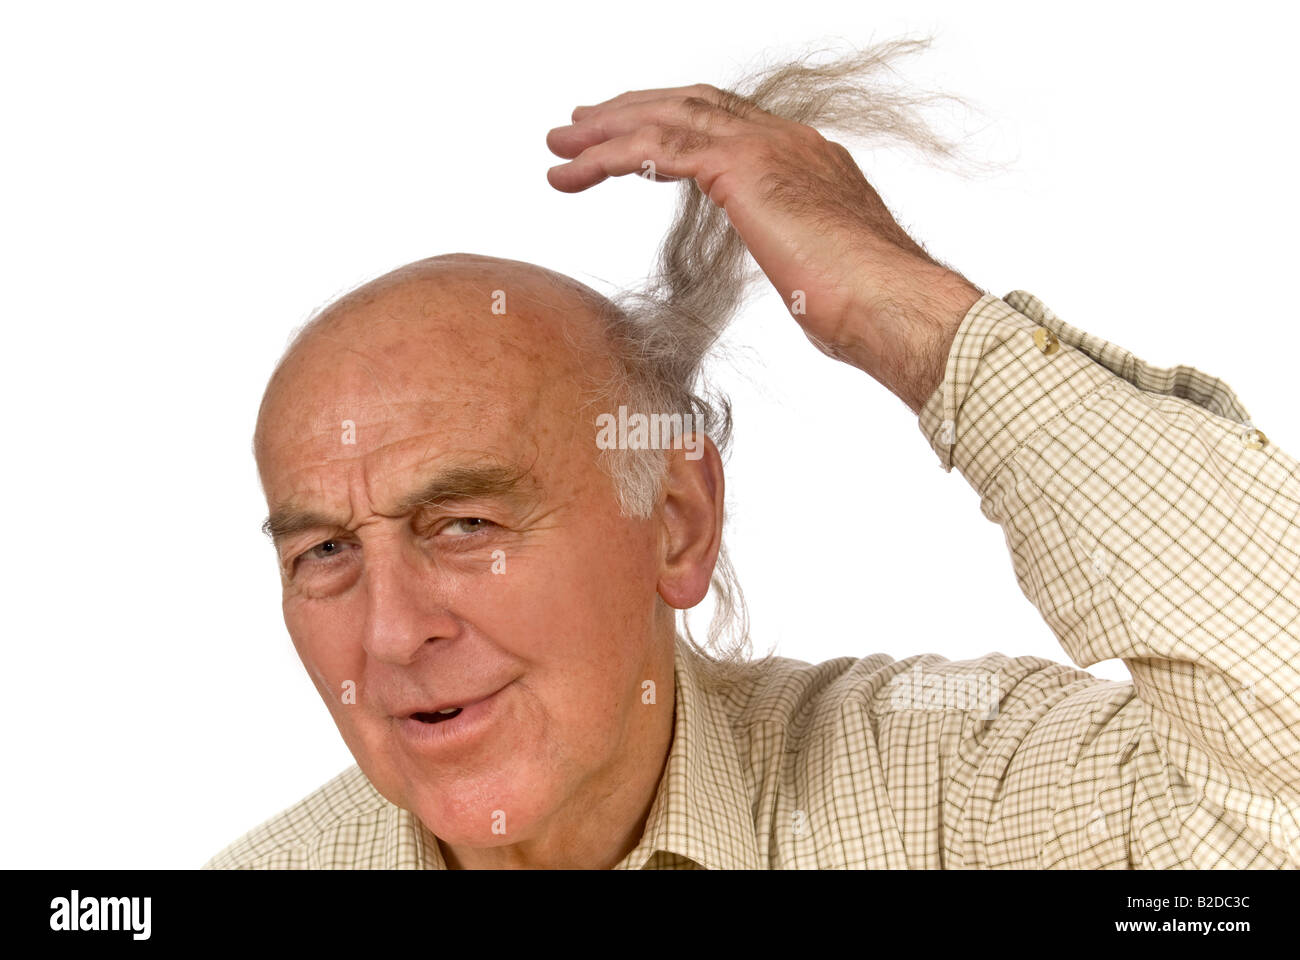 Horizontal close up portrait of an elderly gentleman supporting a lengthy comb over hairstyle Stock Photo